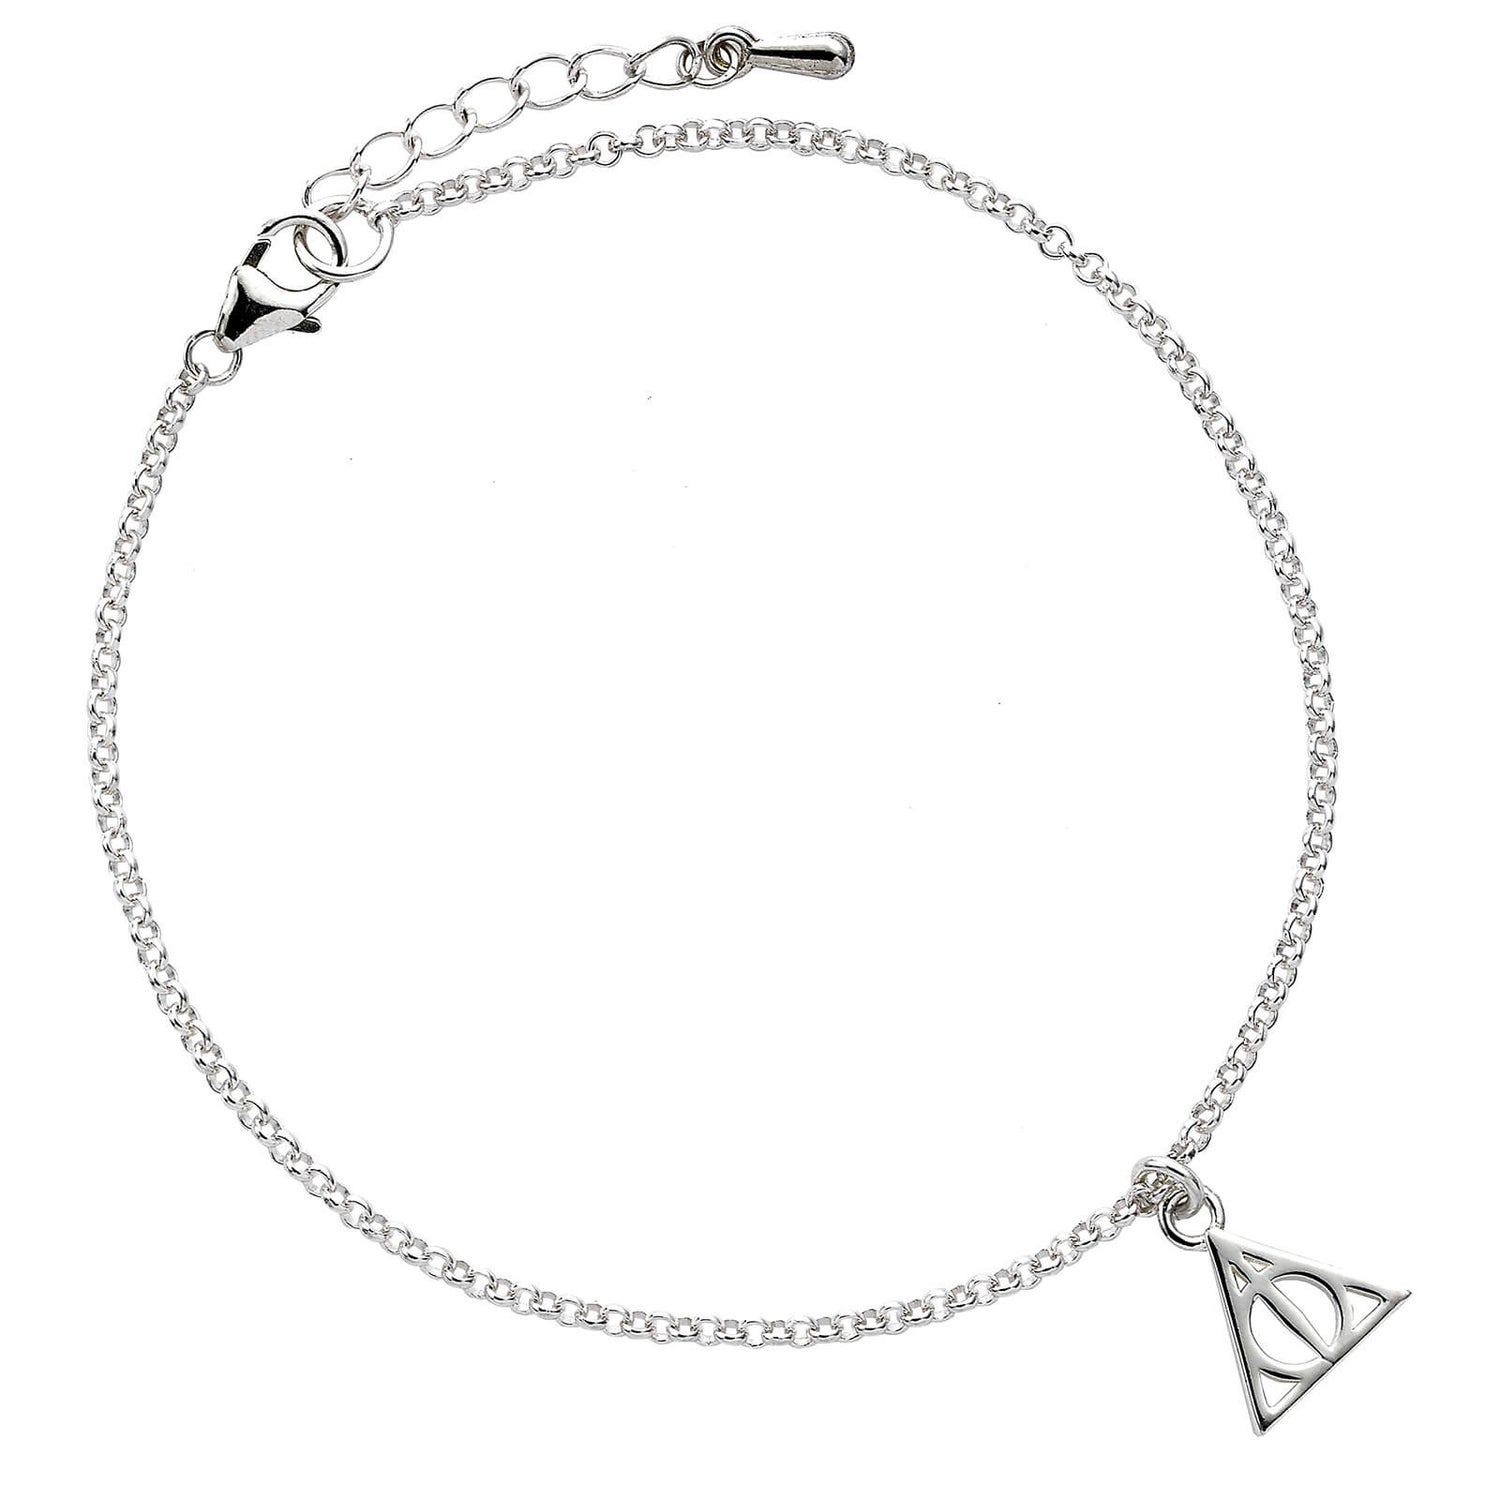 Harry Potter Deathly Hallows Chain Bracelet - Sterling Silver